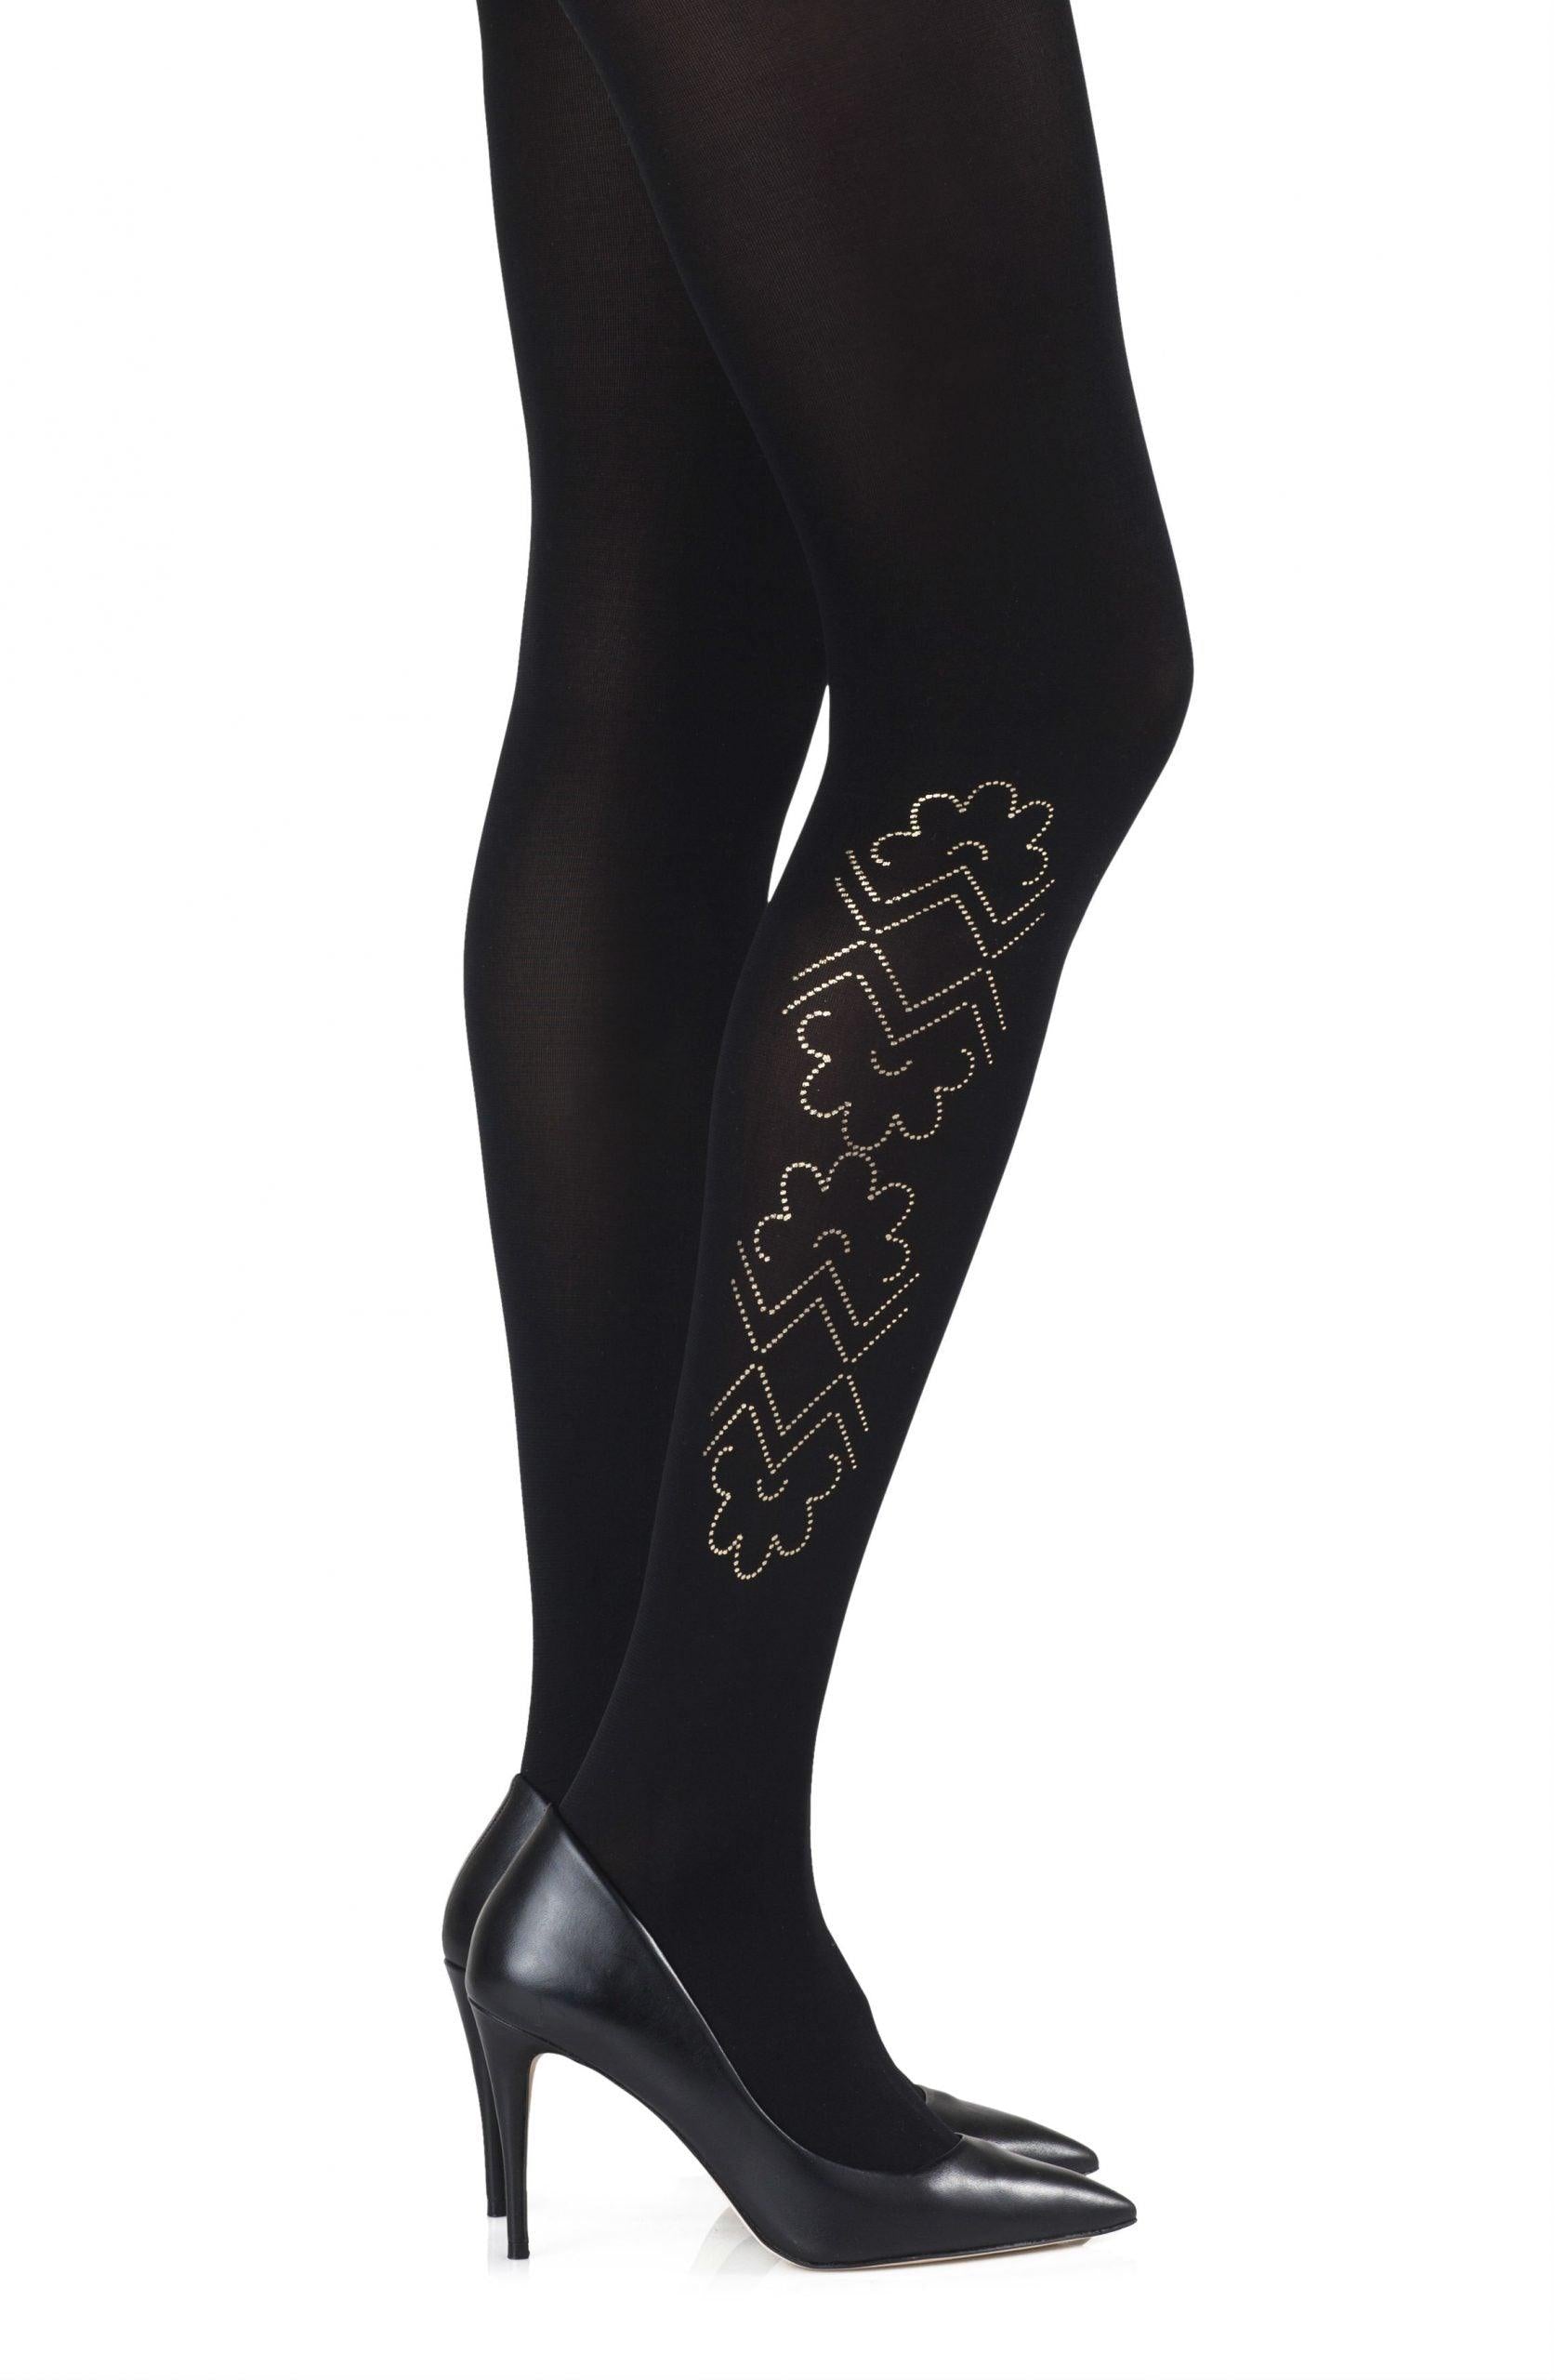 Zohara "Caught In The Metal" Black Print Tights - Sydney Rose Lingerie 